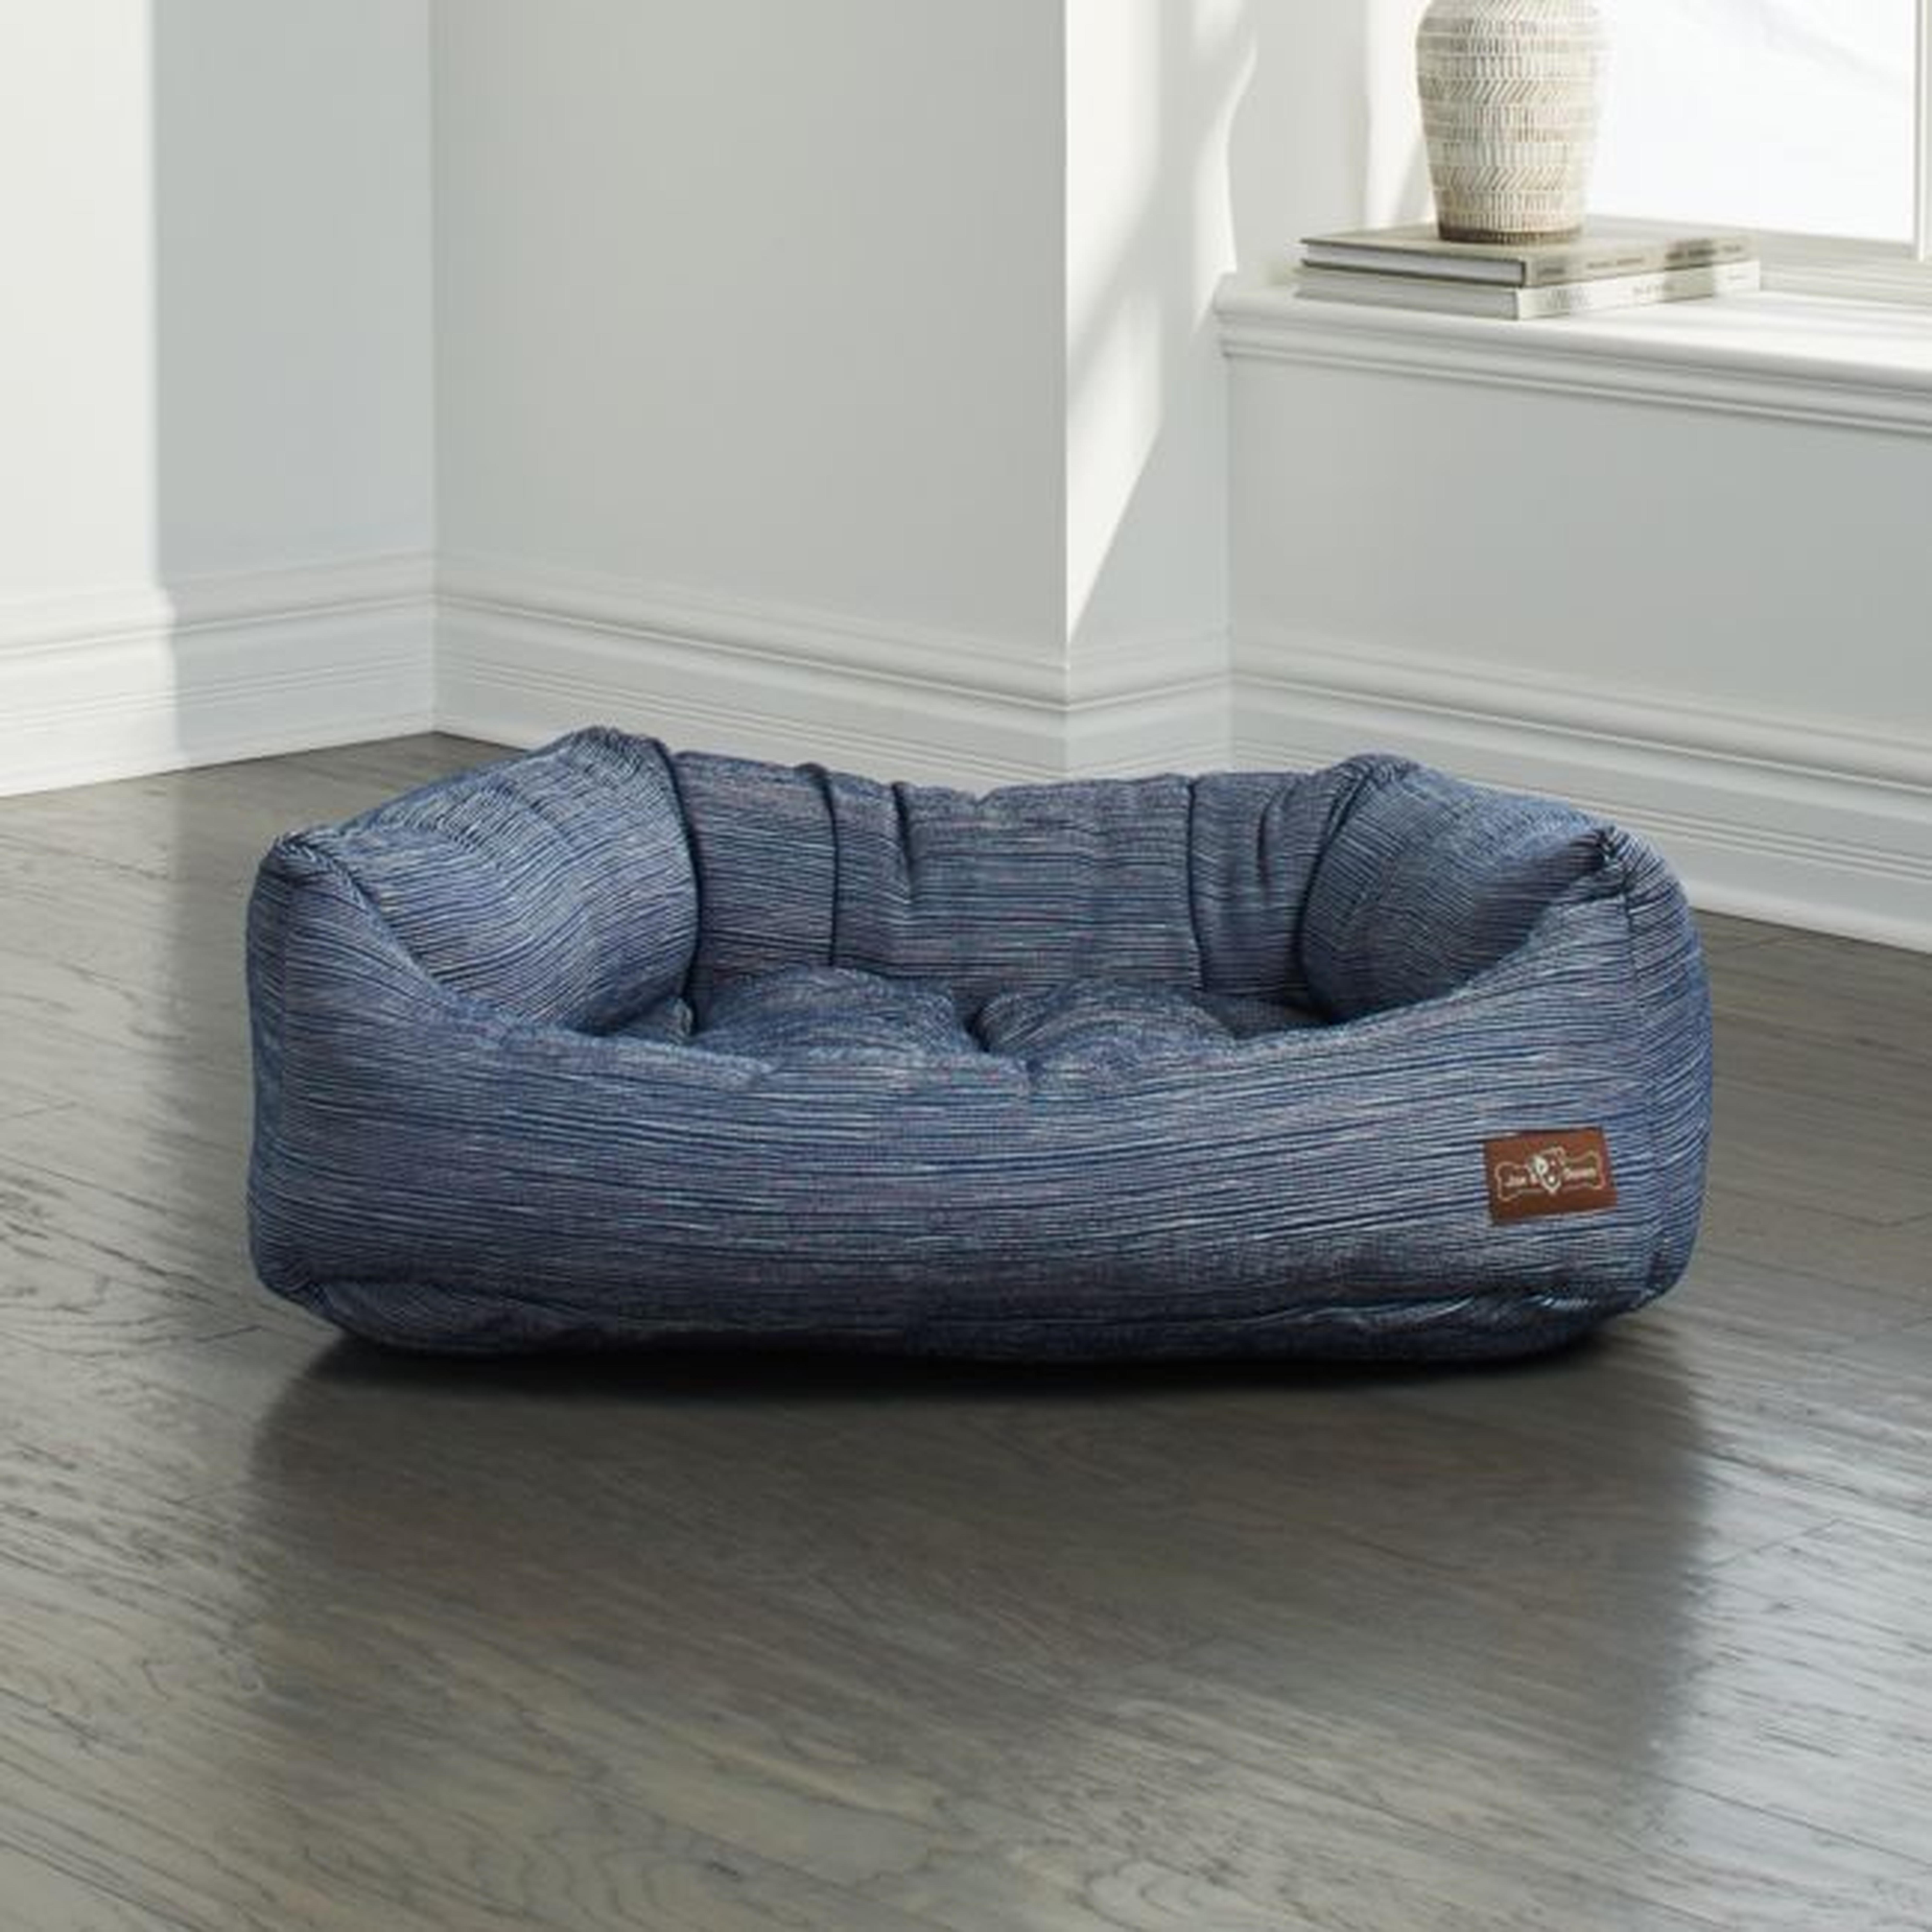 Napper Silhouette Indigo Large Dog Bed - Crate and Barrel